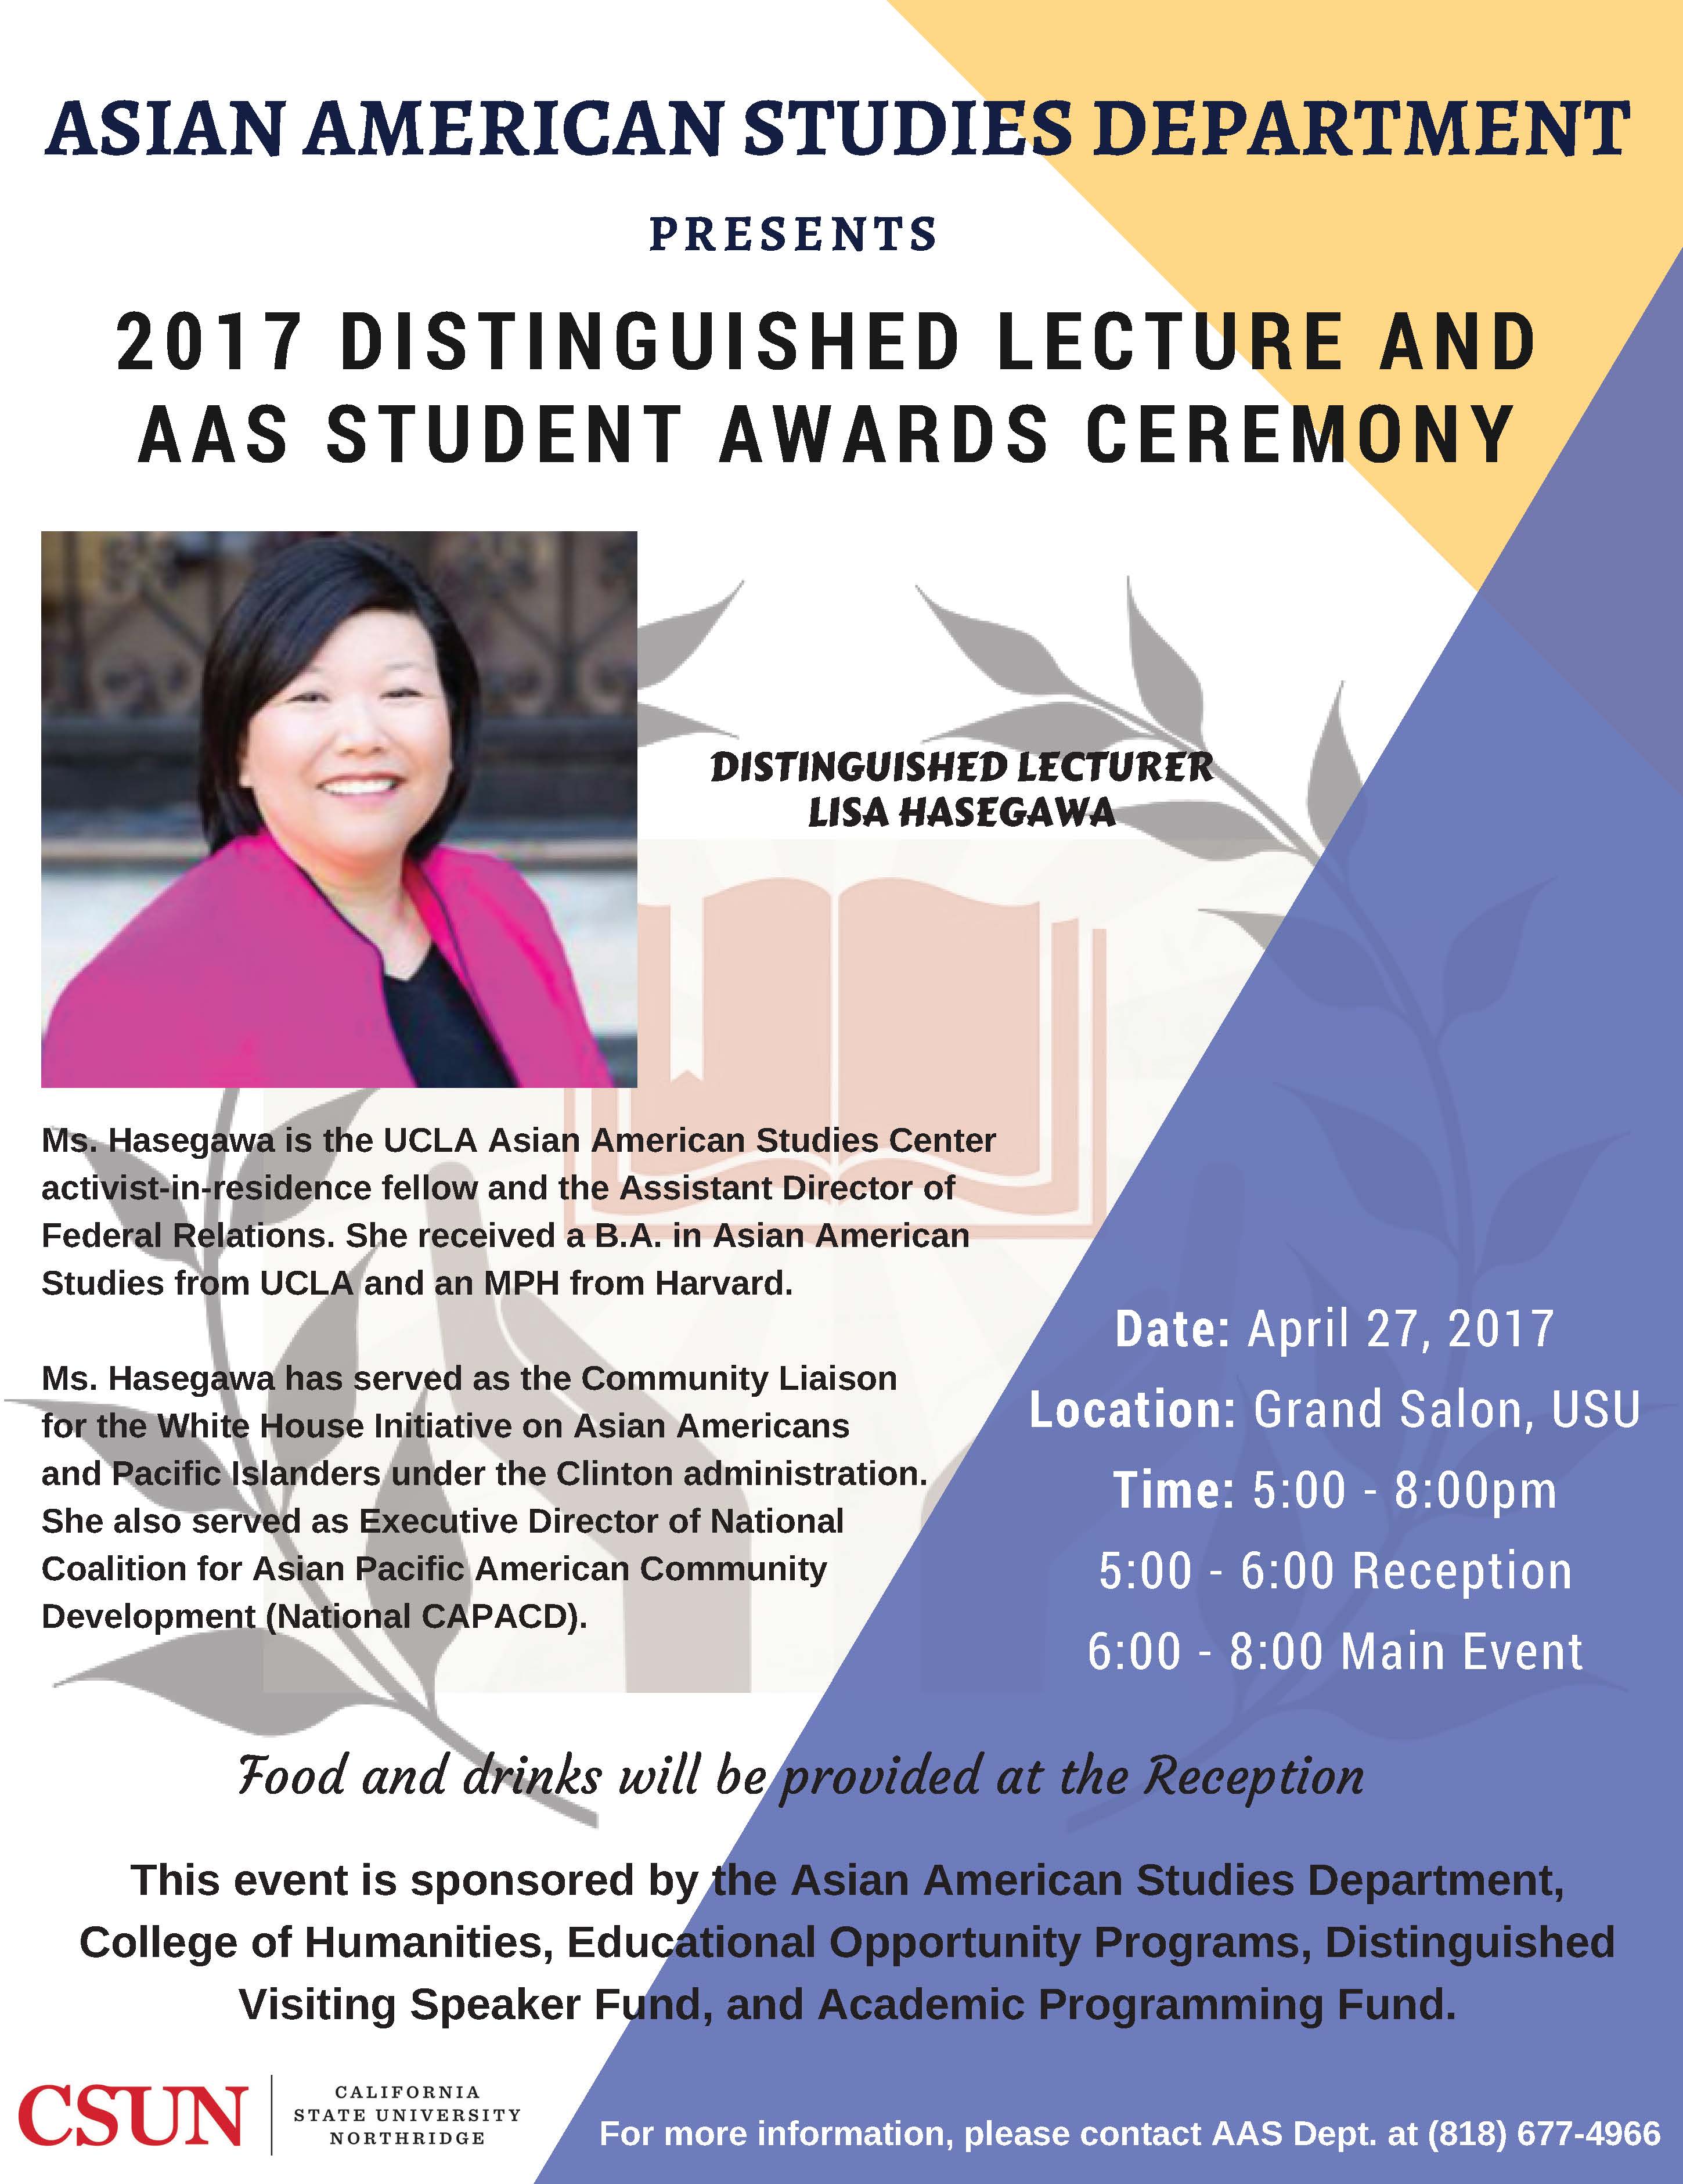 AAS Distinguished Lecture and Student Awards Ceremony